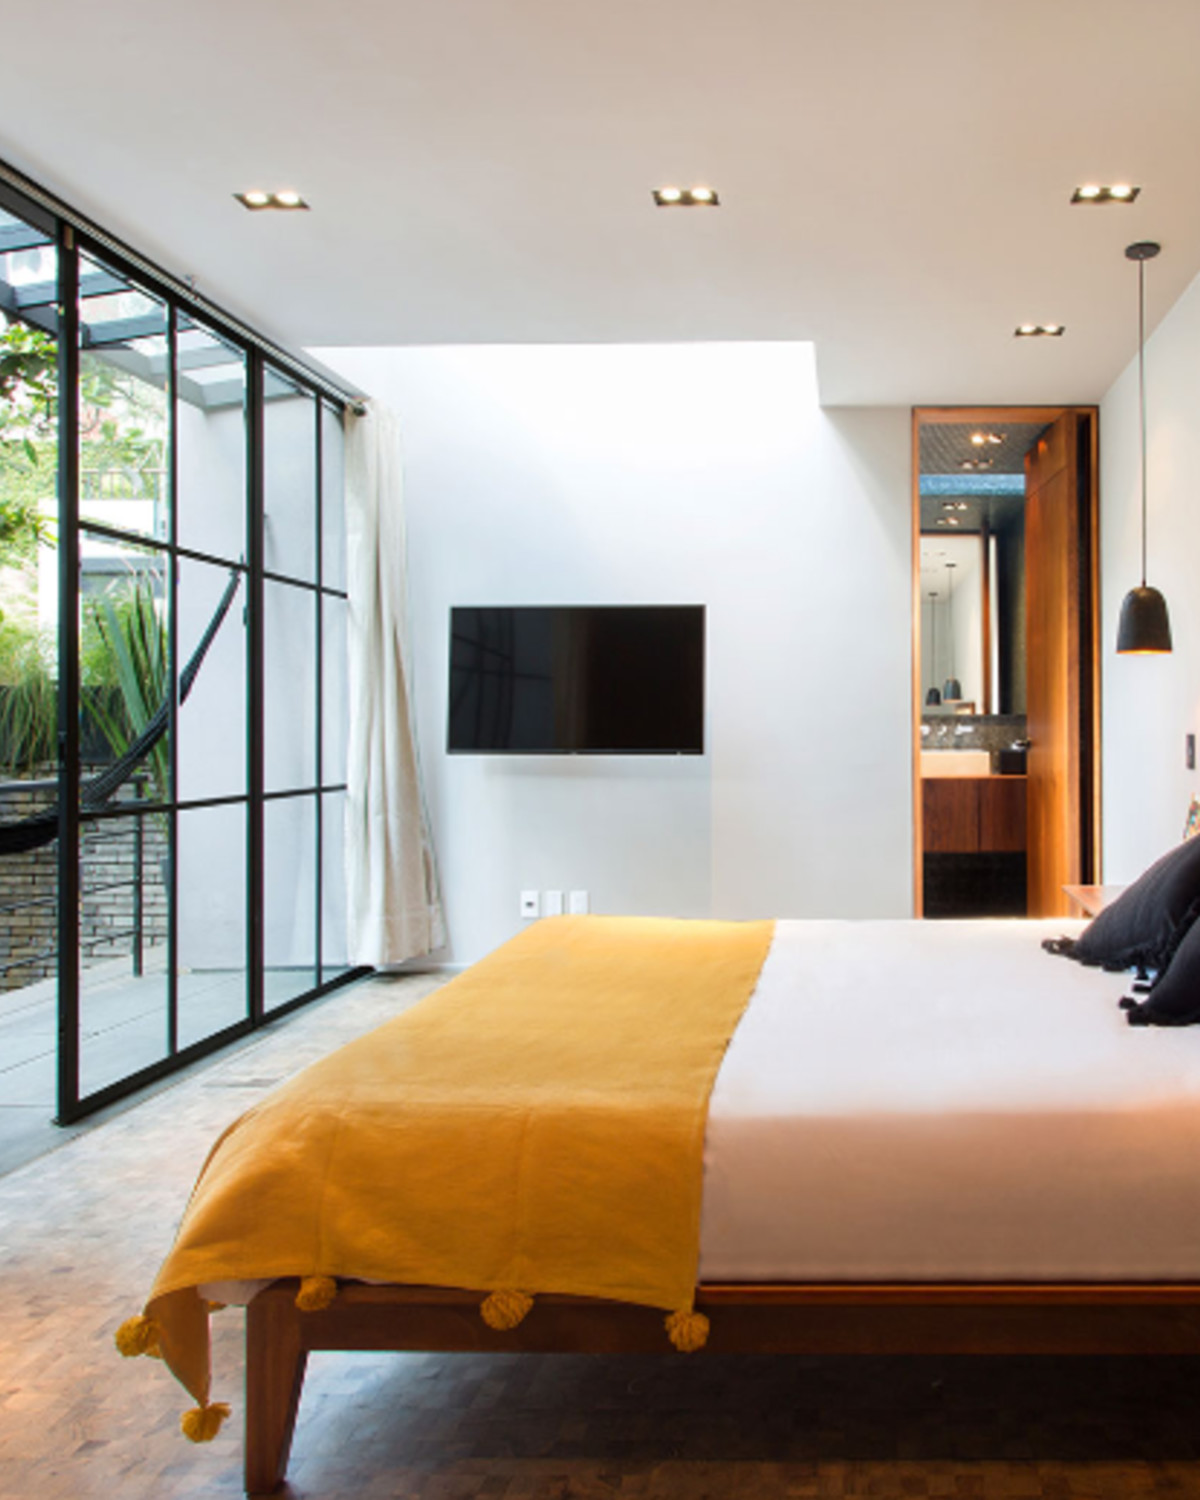 a bed with a yellow blanket overlooks a sleek patio